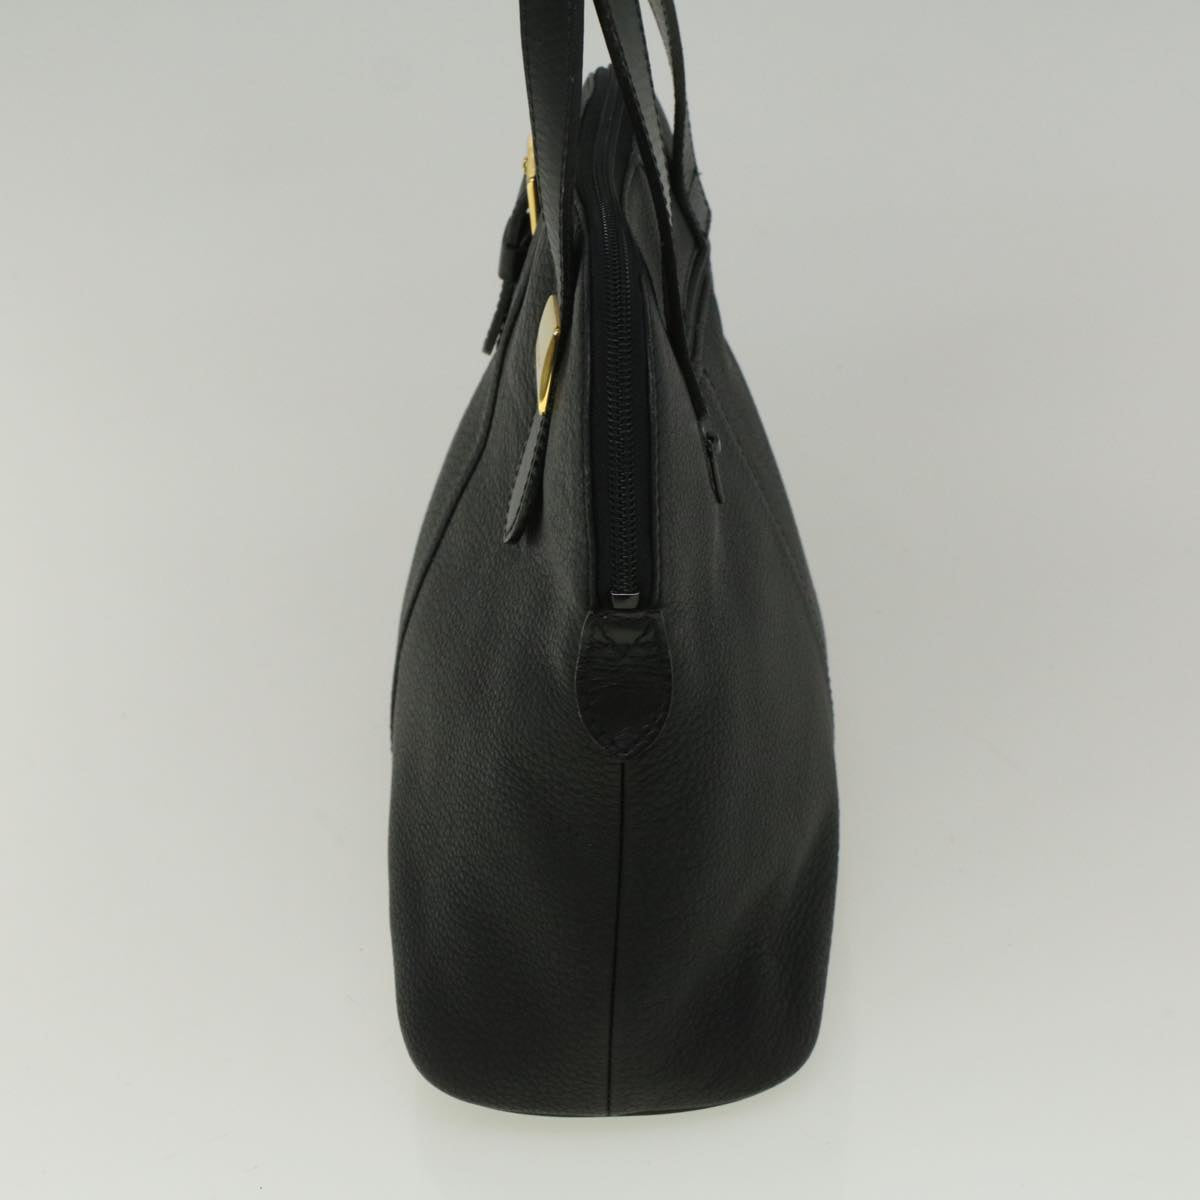 Burberrys Hand Bag Leather Black Auth bs9530